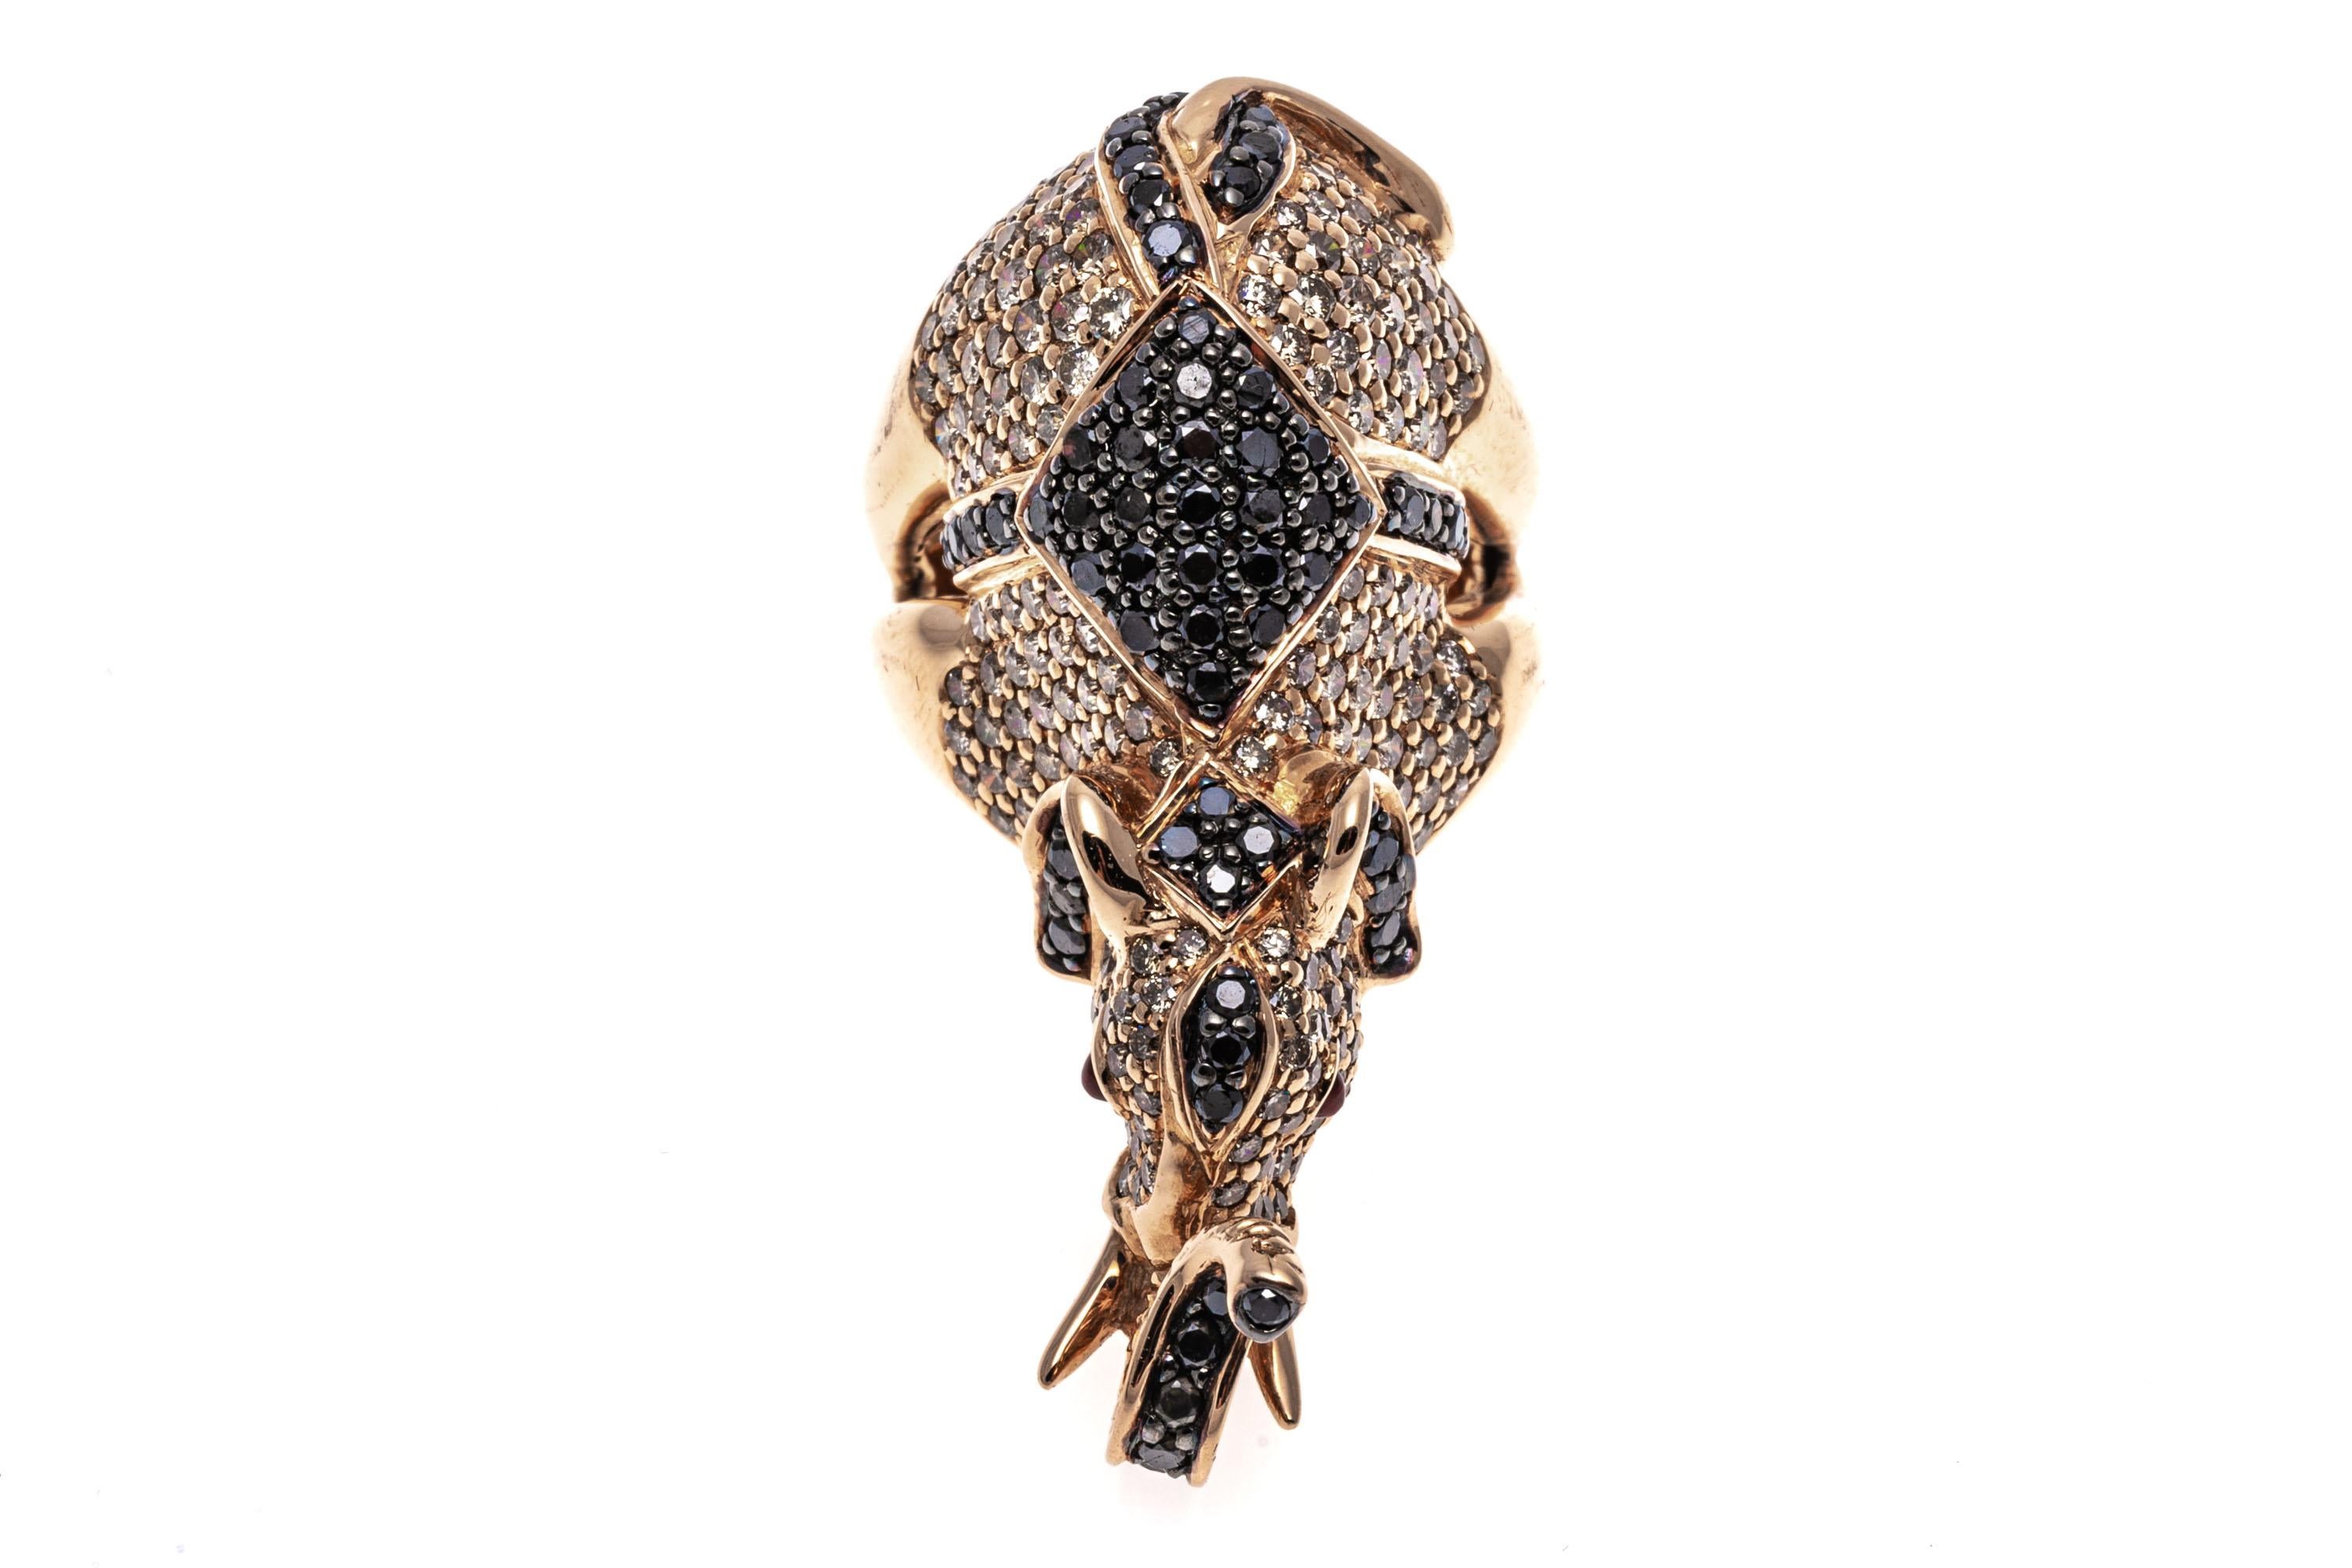 18k rose gold ring ring. This beautiful ring is a fanciful balancing elephant, the body trimmed in the entirety with pave set, round faceted, cognac diamonds approximately 2.06 TCW, and decorated with a saddle and trim of round faceted black